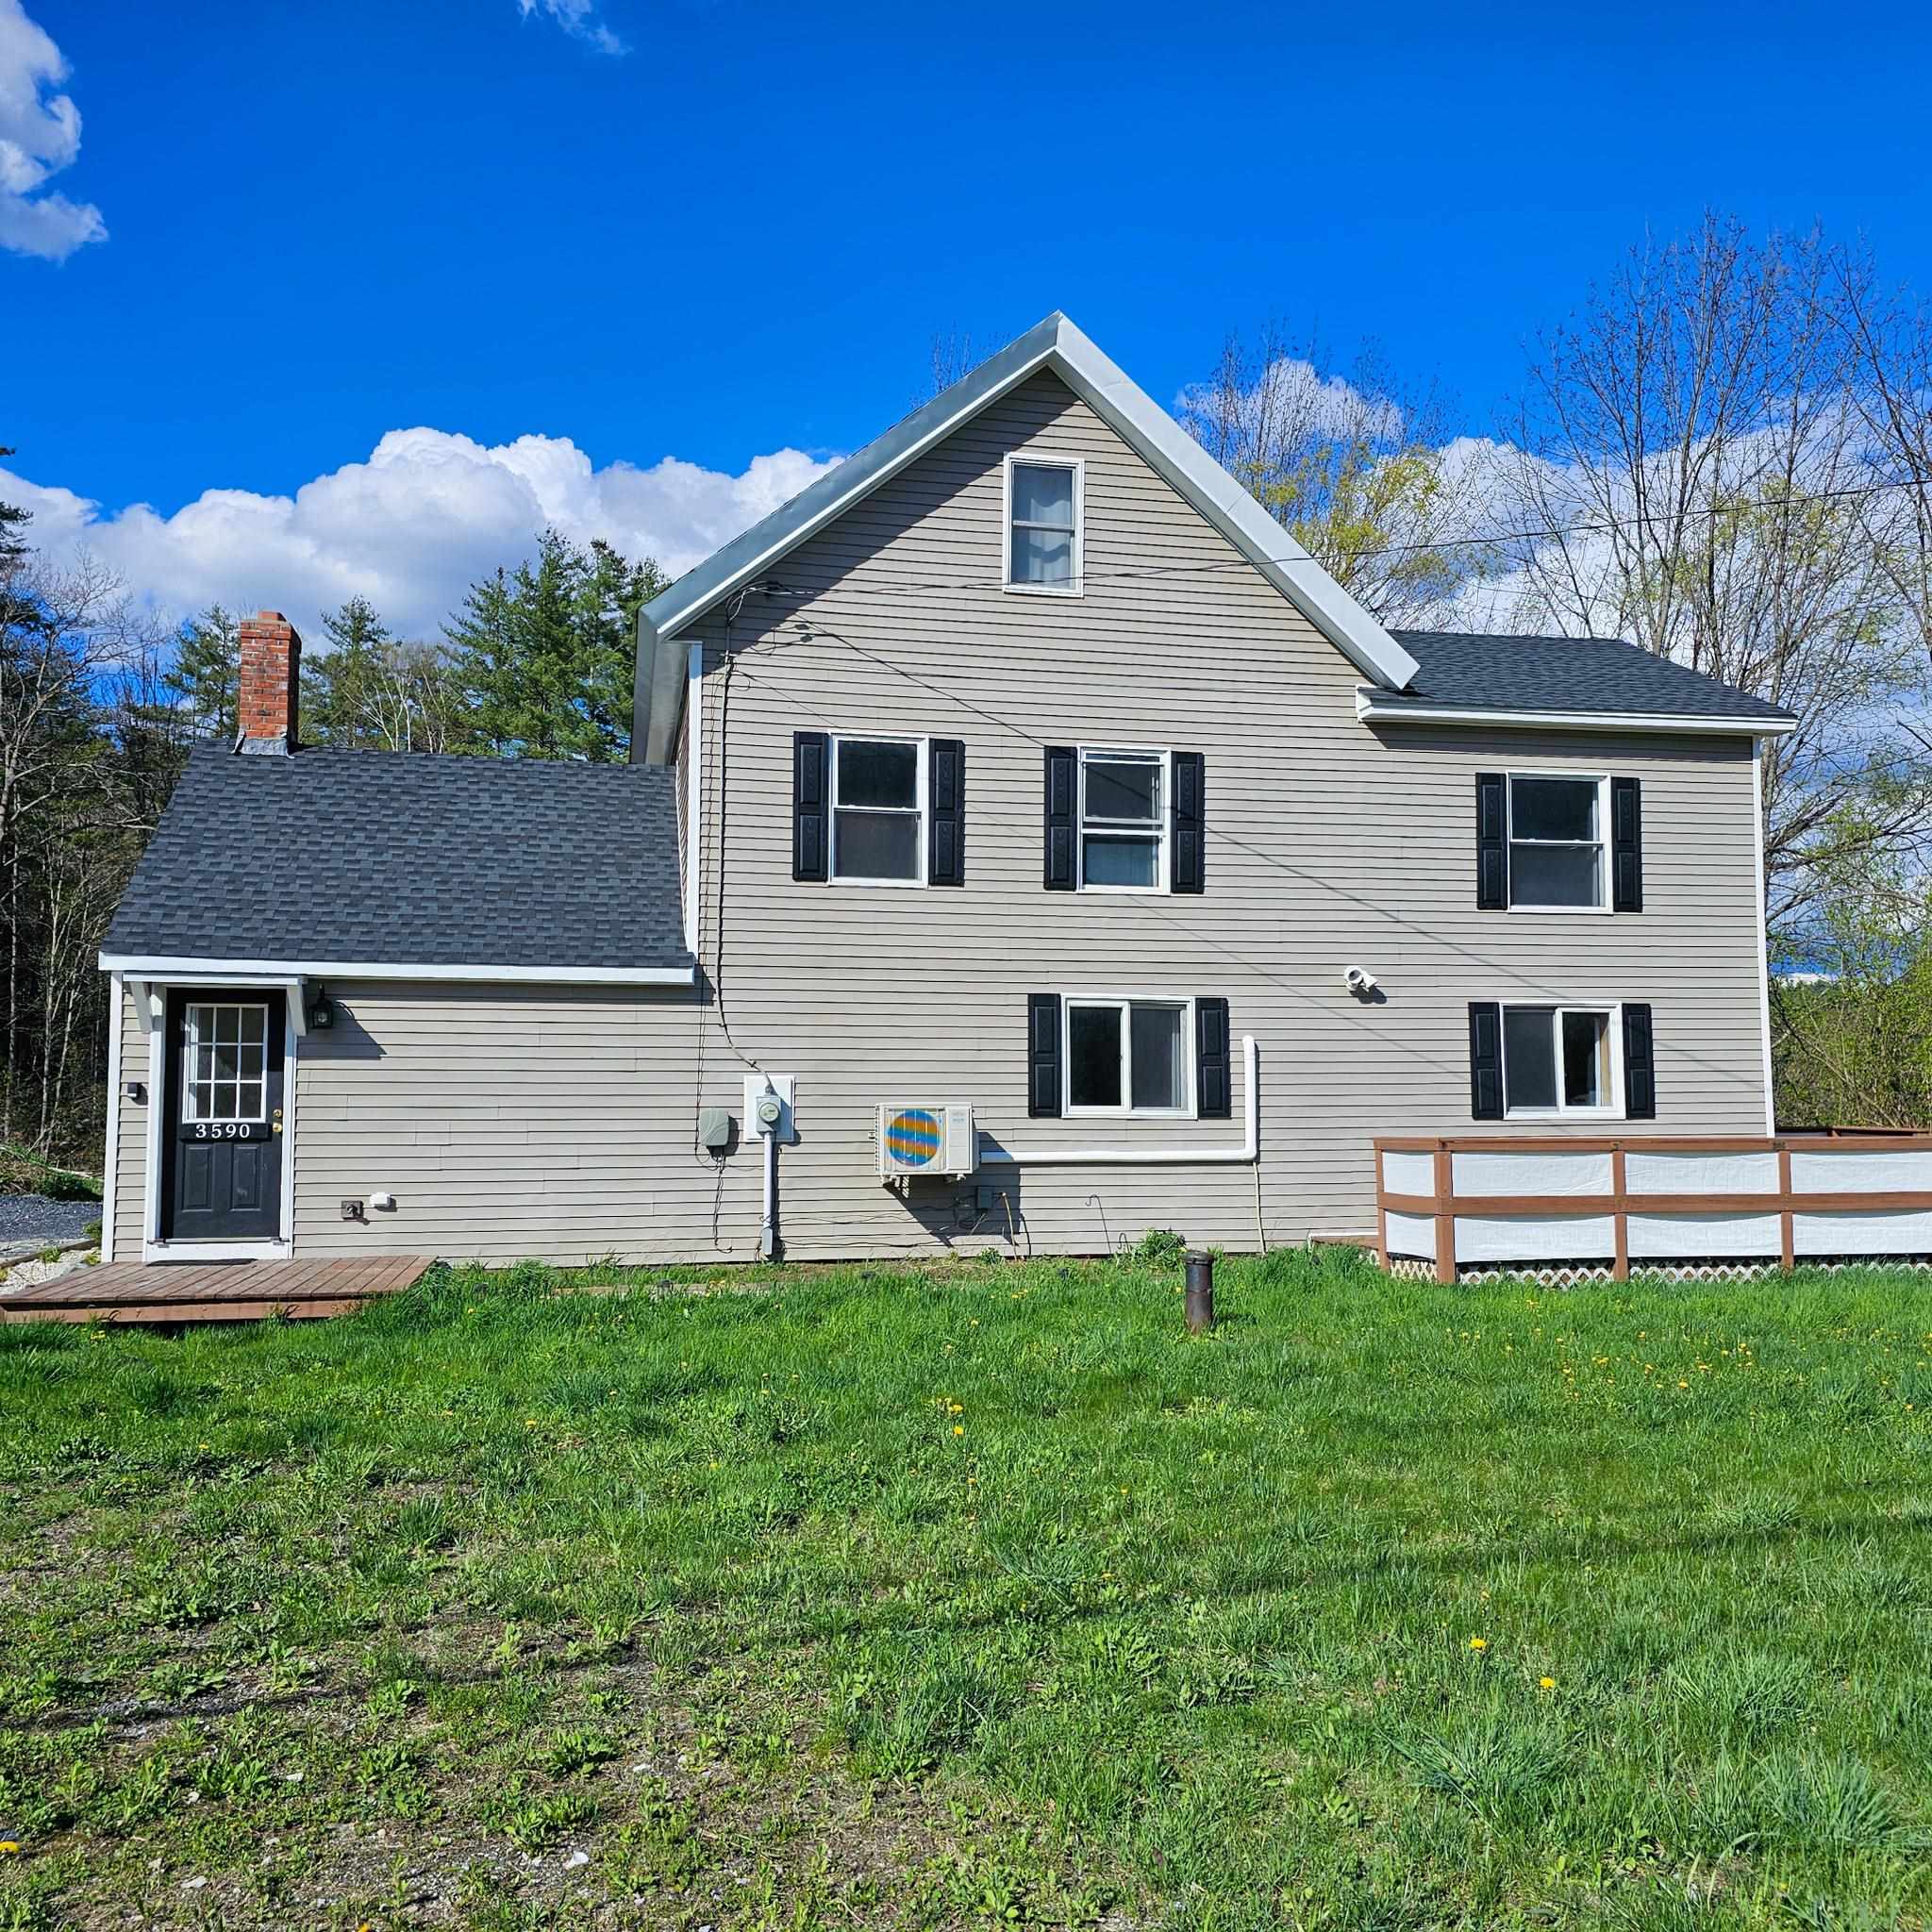 CHESTER VT Homes for sale